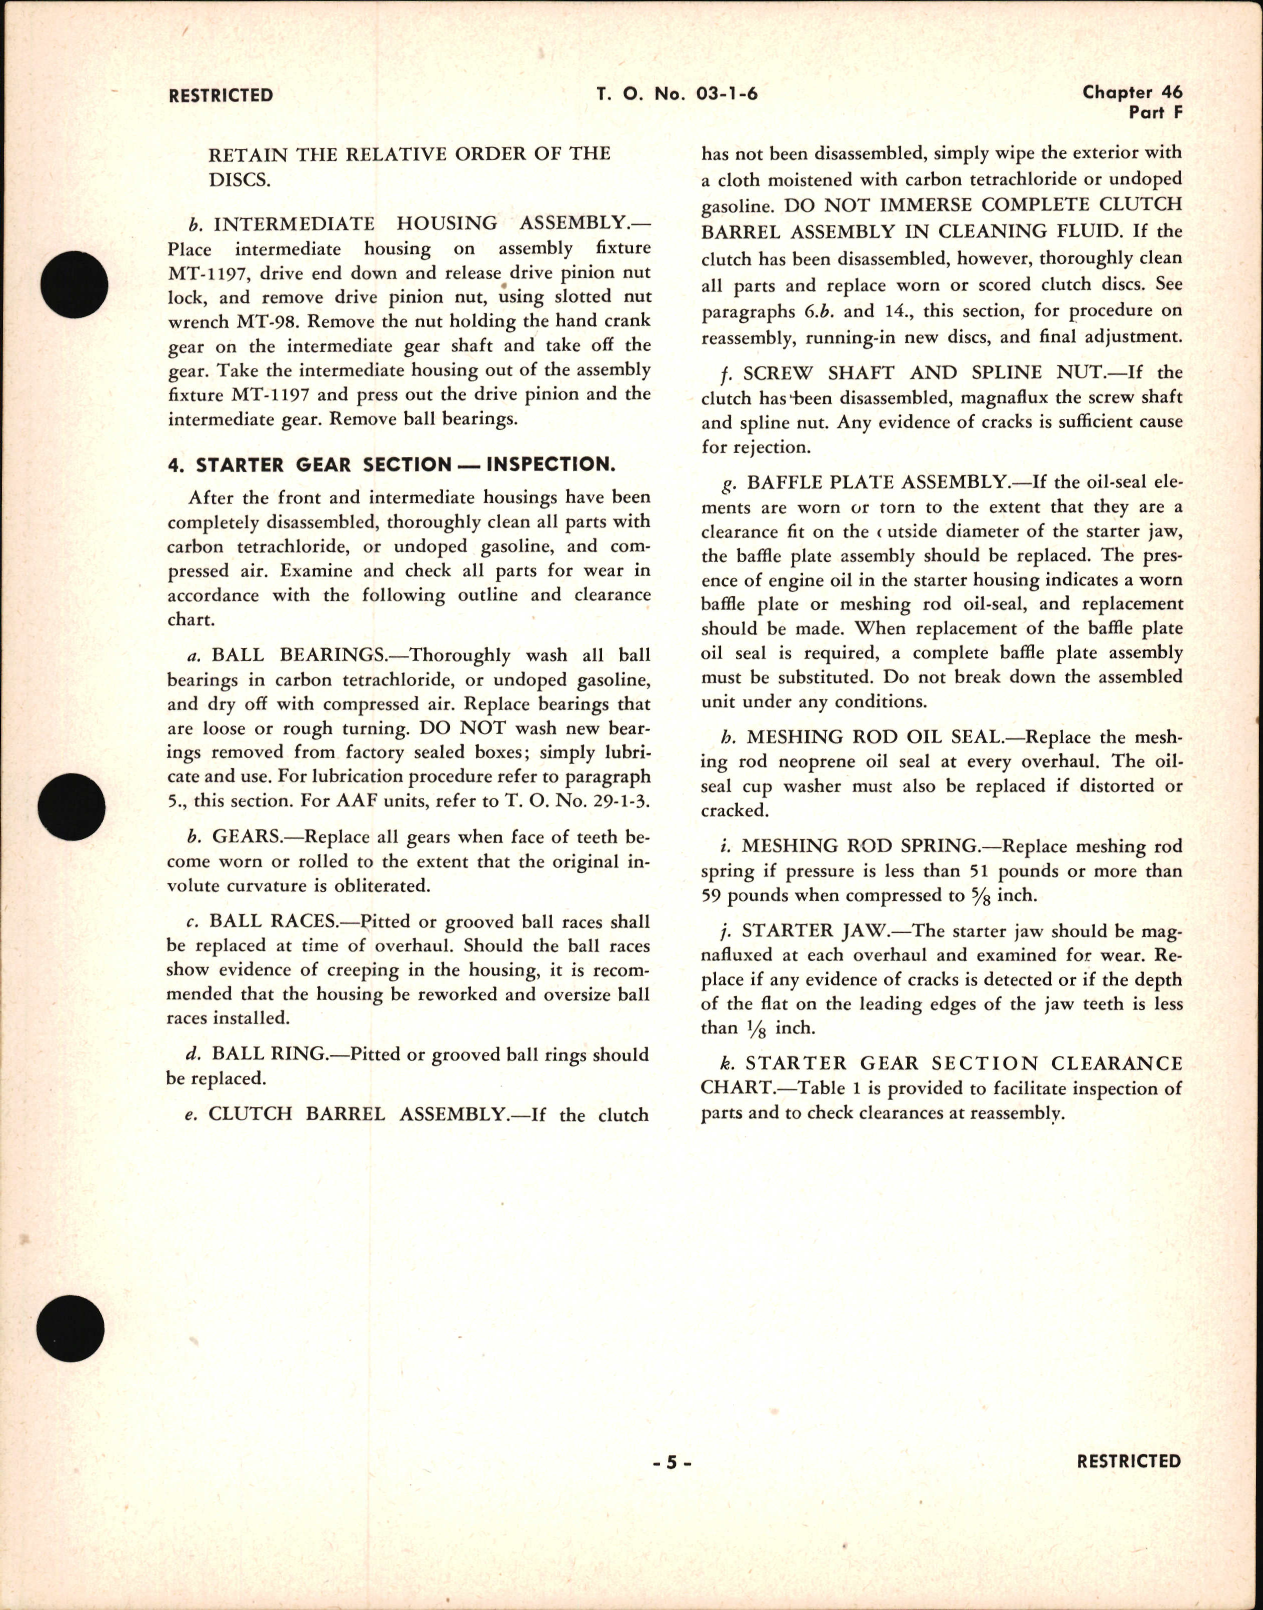 Sample page 5 from AirCorps Library document: Overhaul Instructions for Direct Cranking Electric Starters, Chapter 46 Part F